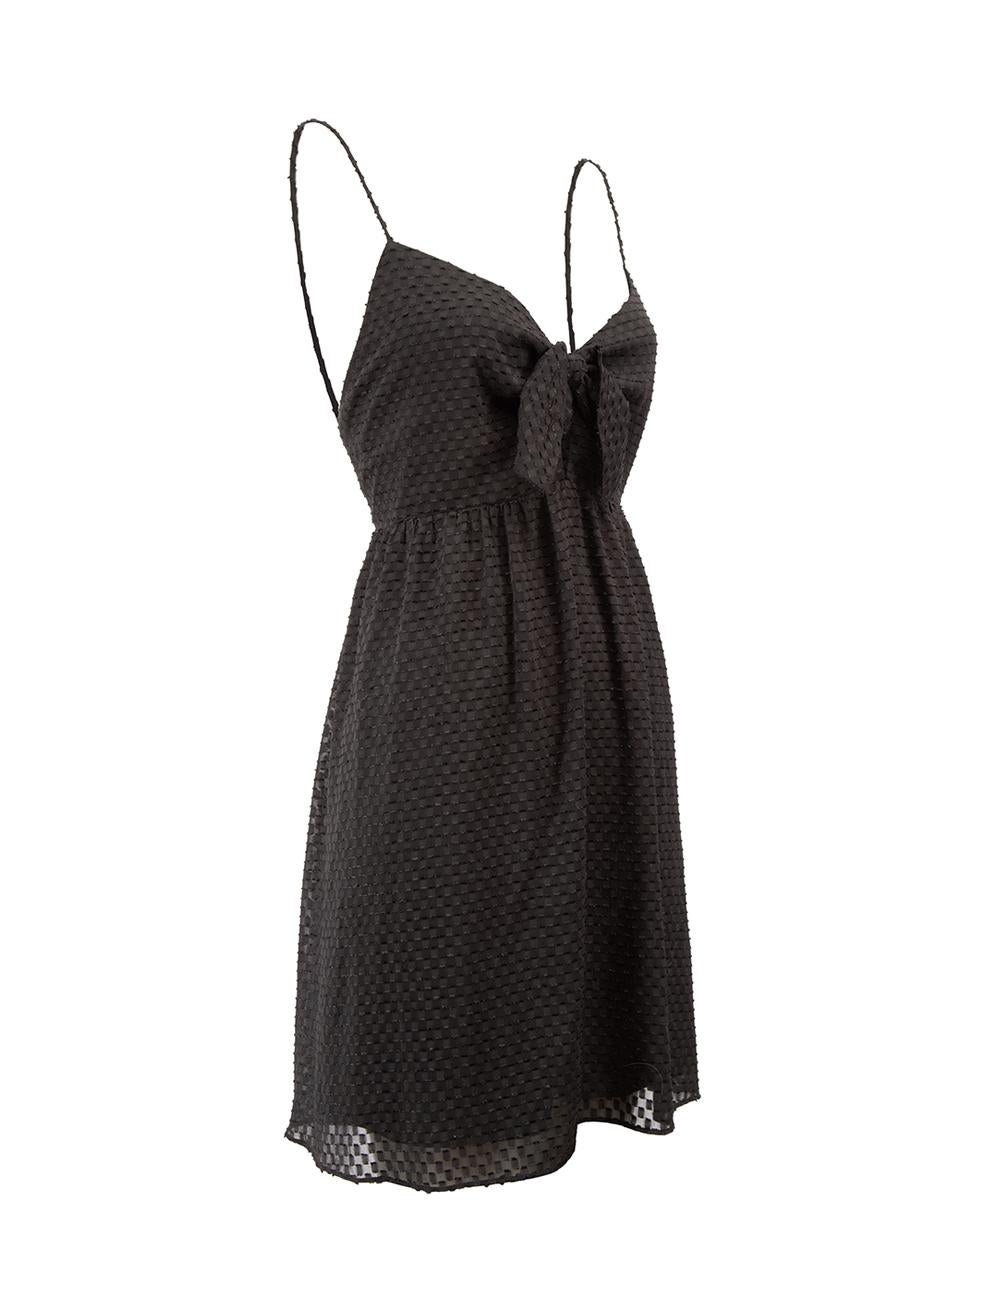 CONDITION is Very good. Hardly any visible wear to top is evident on this used Alice + Olivia designer resale item.
 
 Details
  Black
 Polyester
 Tank top
 Tufted texture
 V neckline
 Bow detail with cut out accent
 Shirred back panel
 Back zip